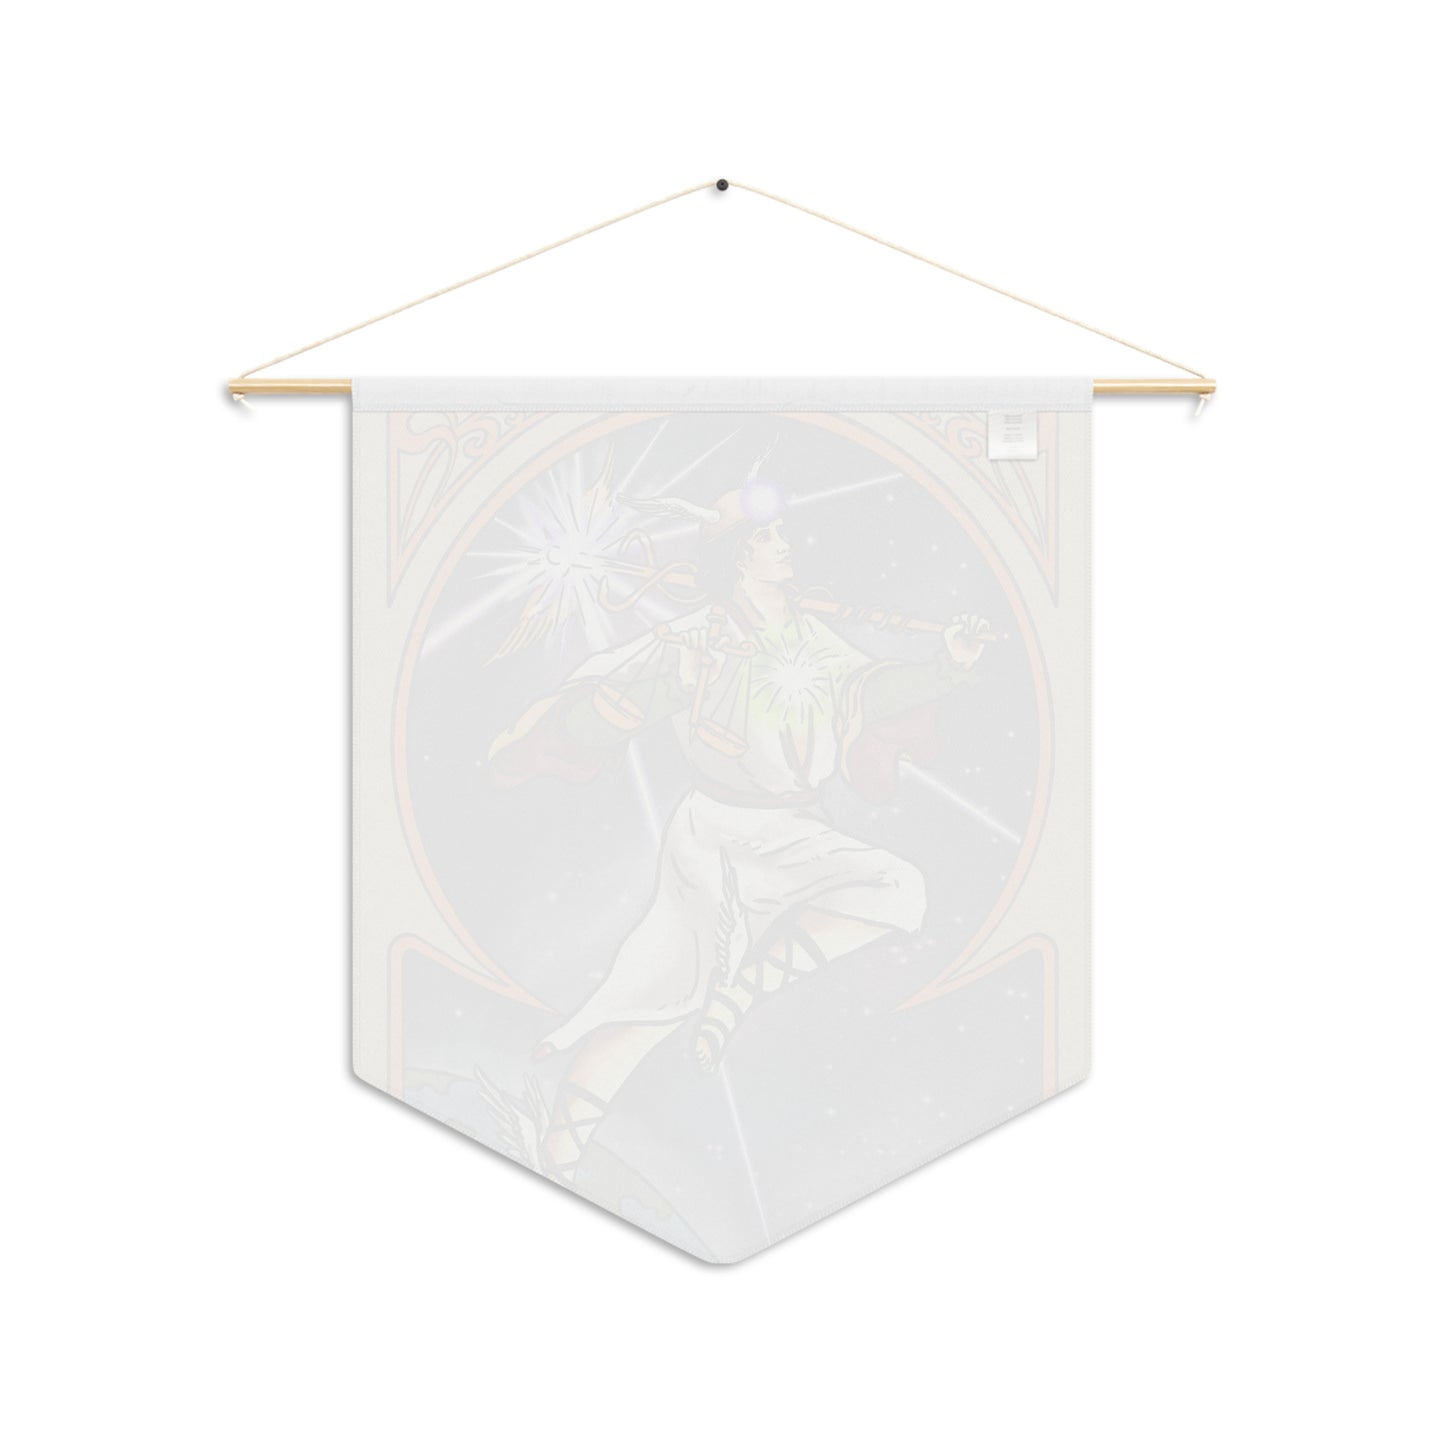 'The Fool Becomes Enlightened' Tarot Card Hanging Wall Pennant | Greek God Hermes